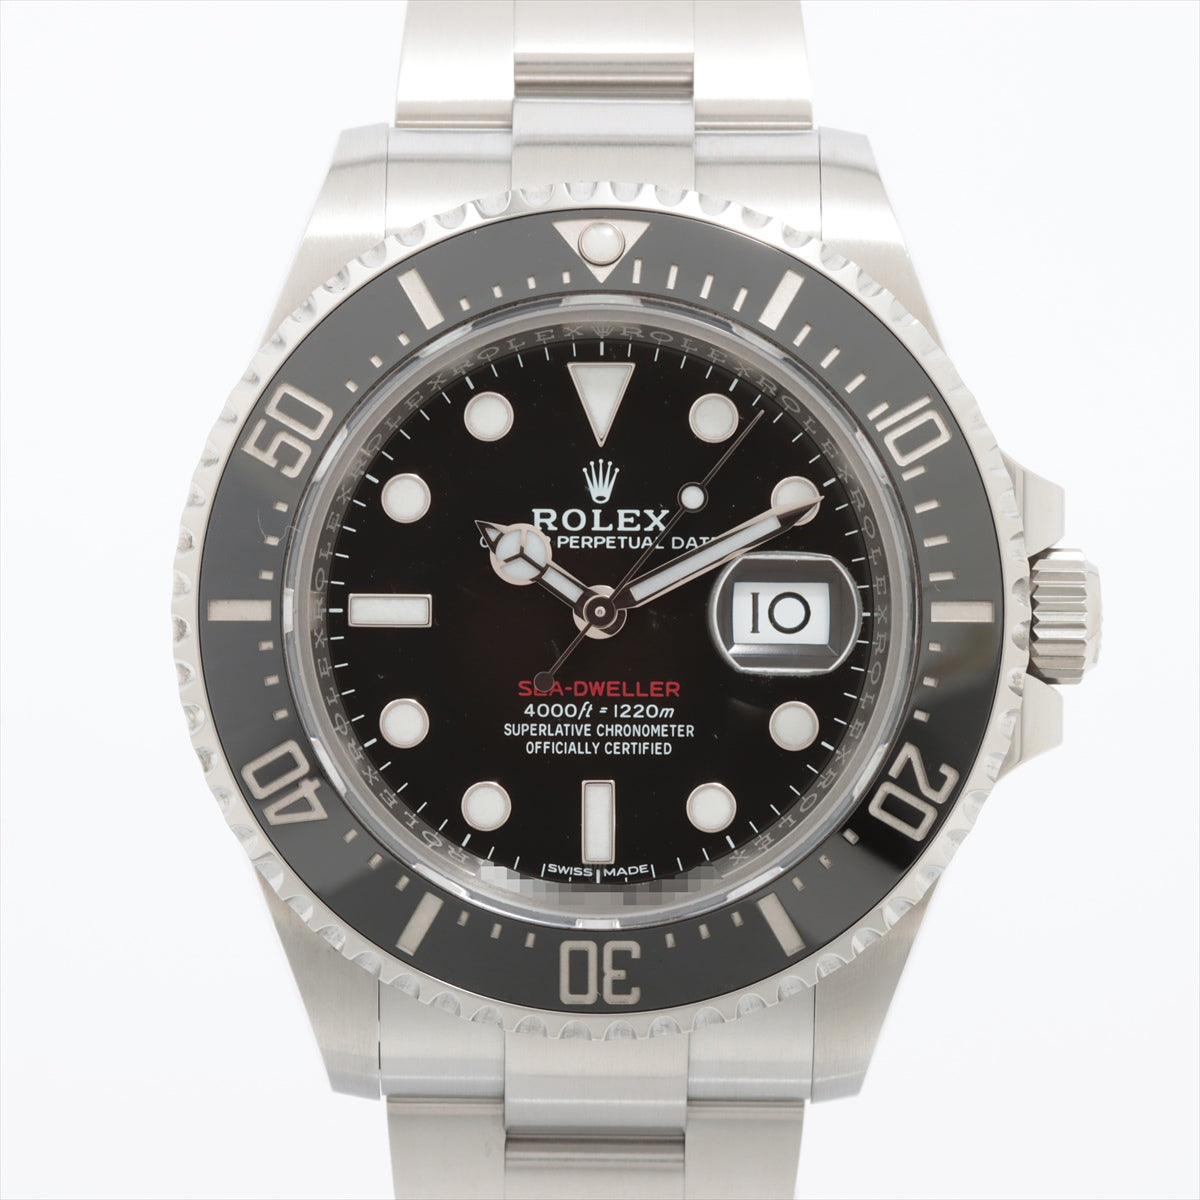 Rolex Sea-Dweller 126600 42P4L753 SS AT Black-Face Total number of links 11 No Extra Link